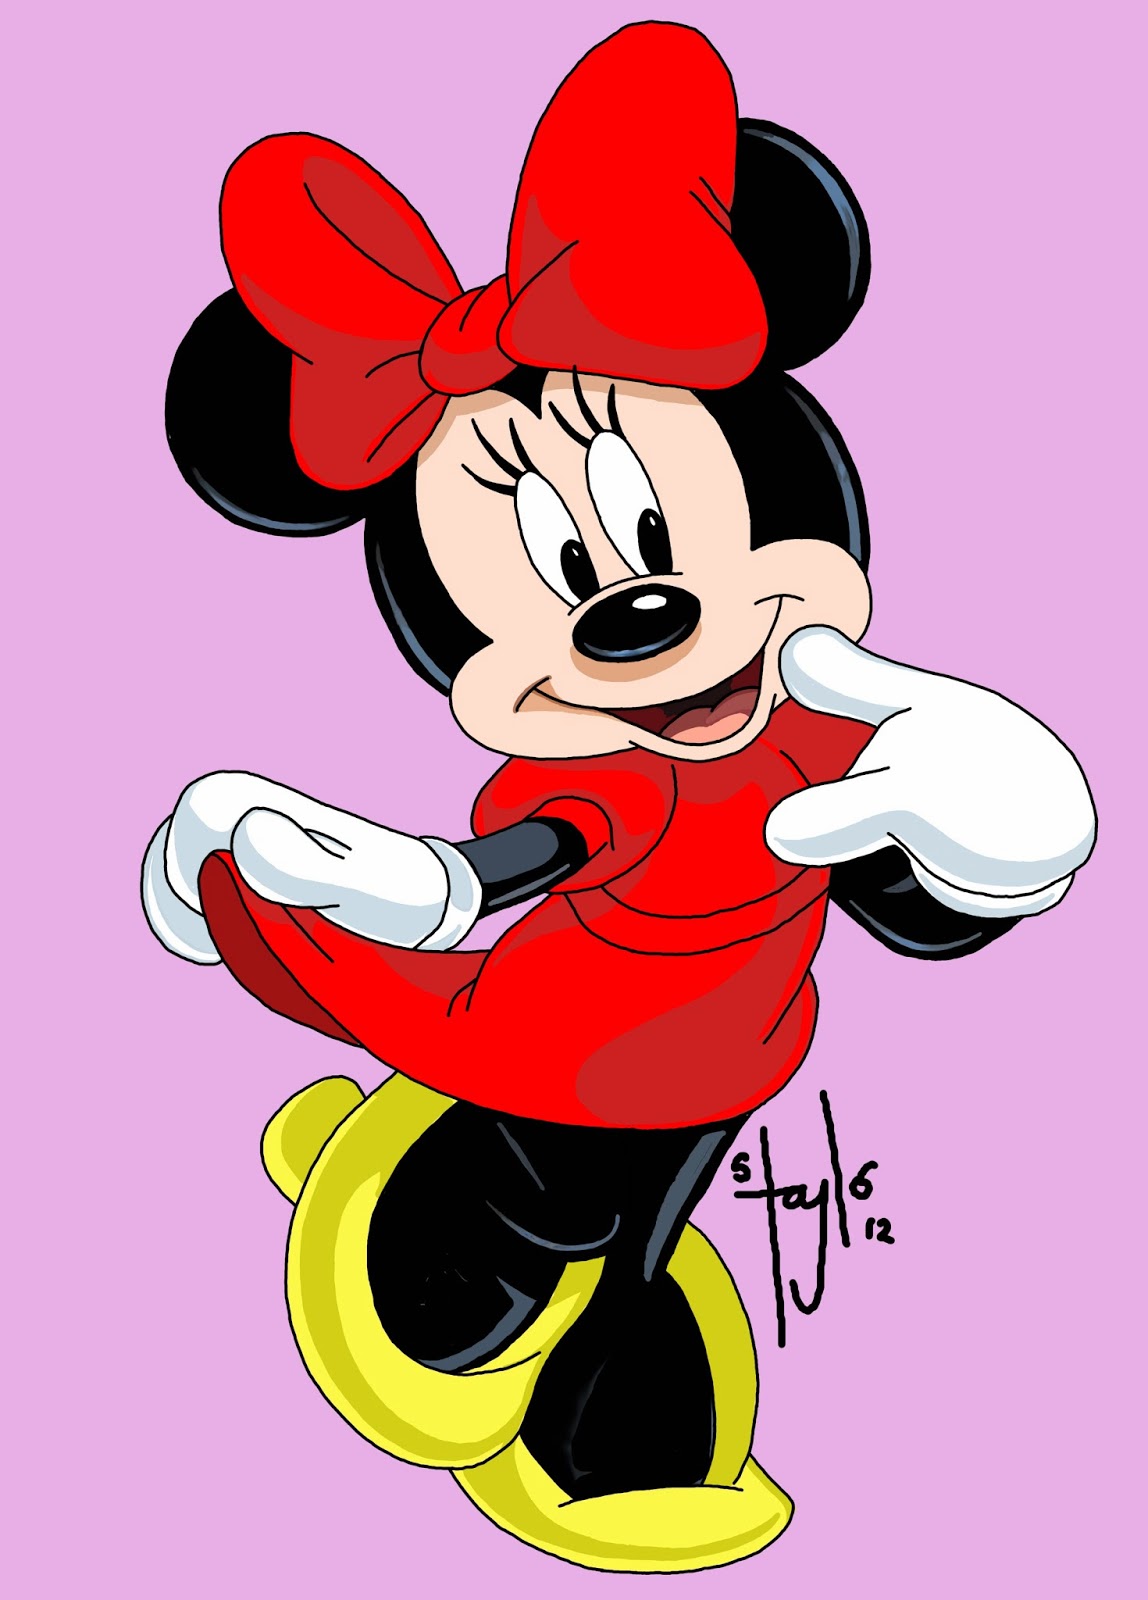 Hd Wallpapers Blog: Minnie Mouse